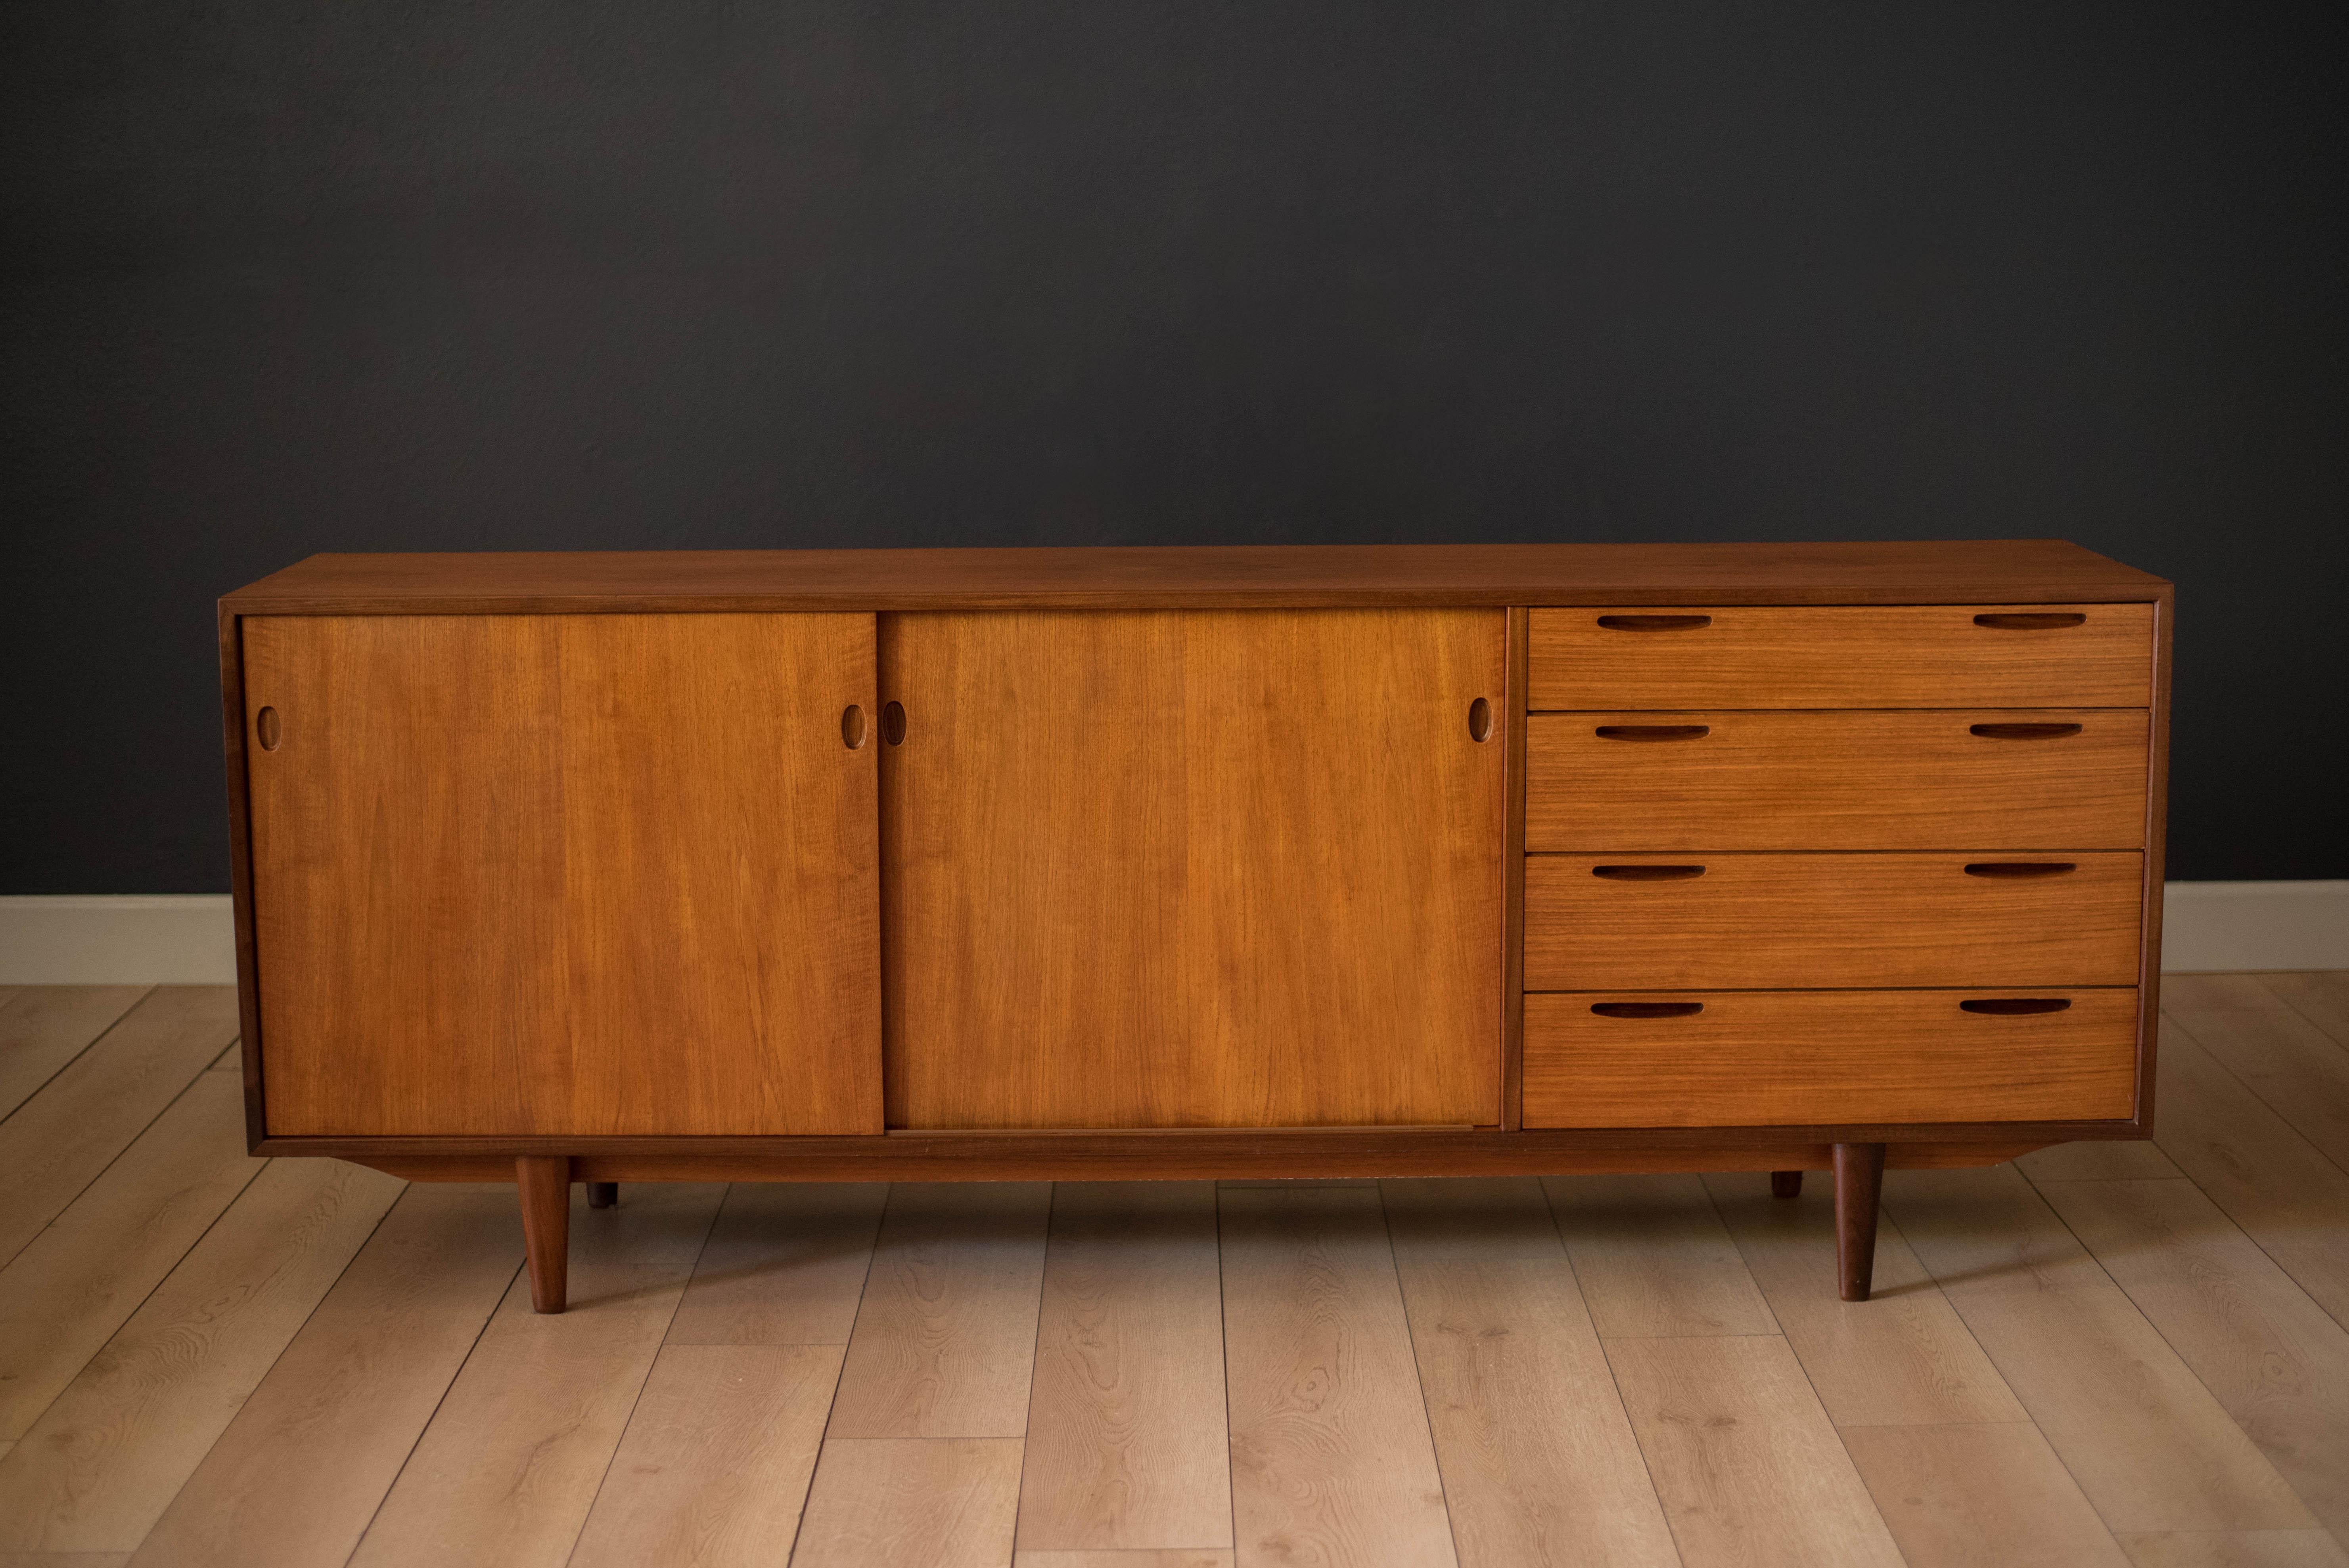 Mid-Century Modern credenza designed by Ib Kofod Larsen for J. Clausen Brande Møbelfabrik. This piece features sliding doors that reveal two interior drawers and open storage with adjustable shelving. Includes four additional drawers with sculpted